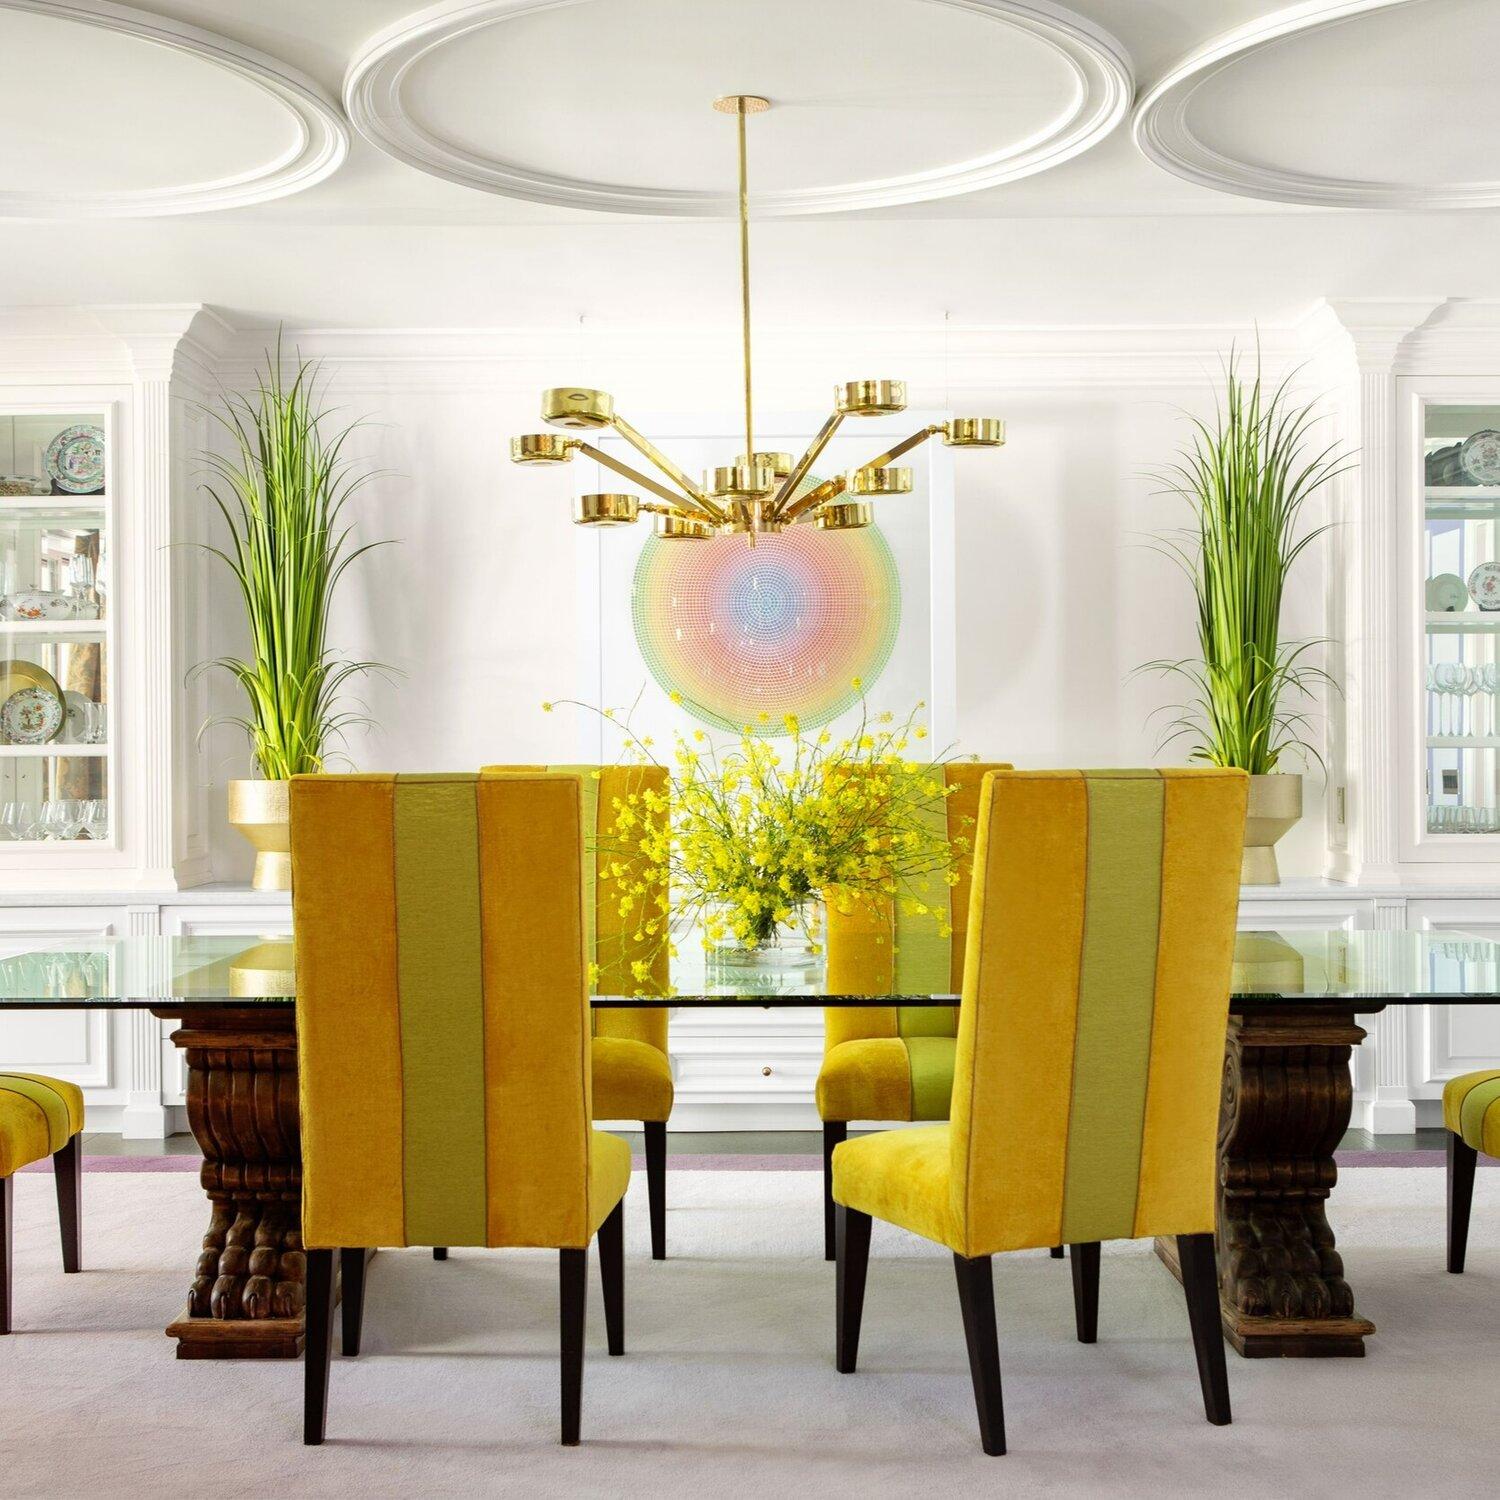 Oval Oculus Articulating Ceiling Light by Gaspare Asaro -Murano Glass In New Condition For Sale In New York, NY